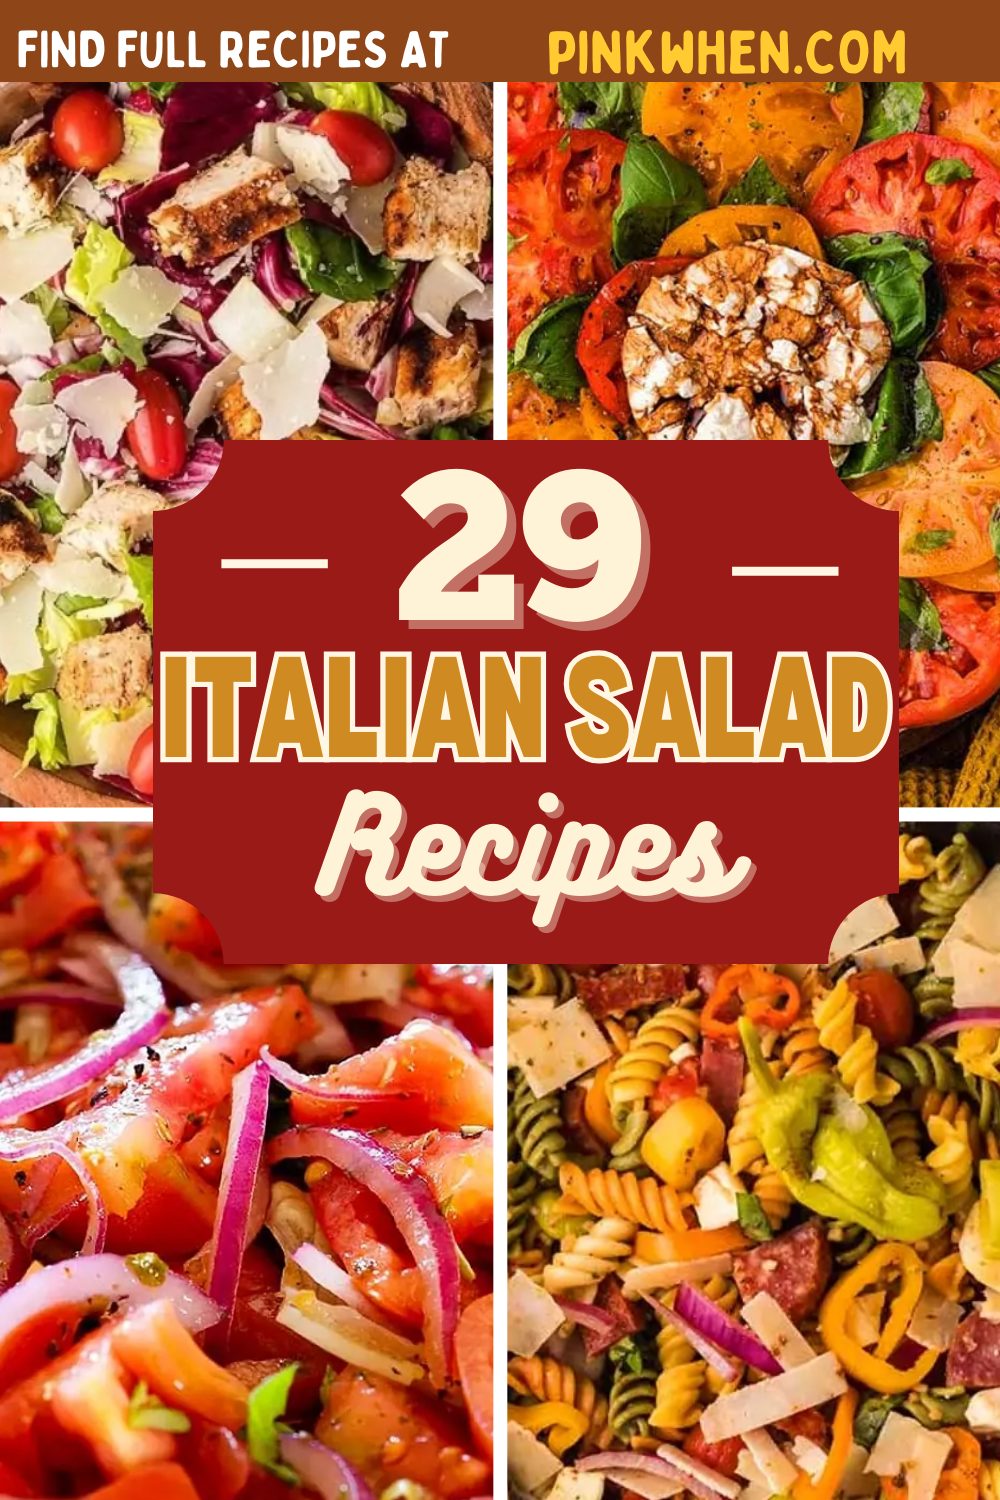 29 Italian Salad Recipes to Fall in Love With